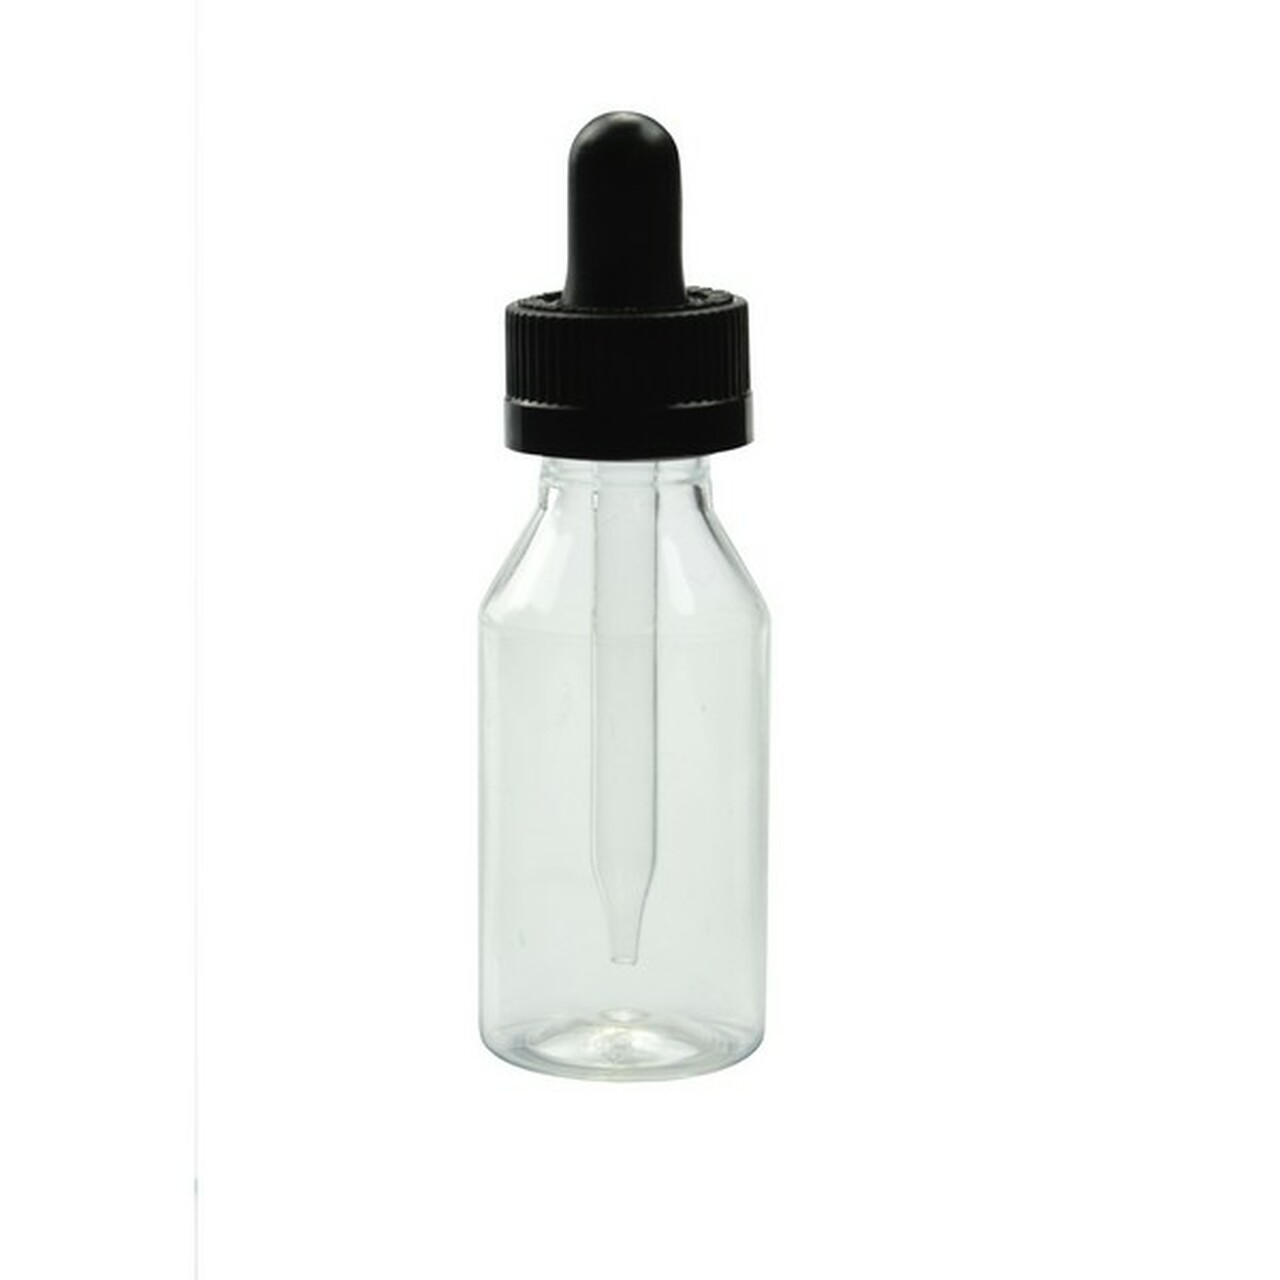 Plastic - Dropper - Search by Closure Type - Bottles & Containers